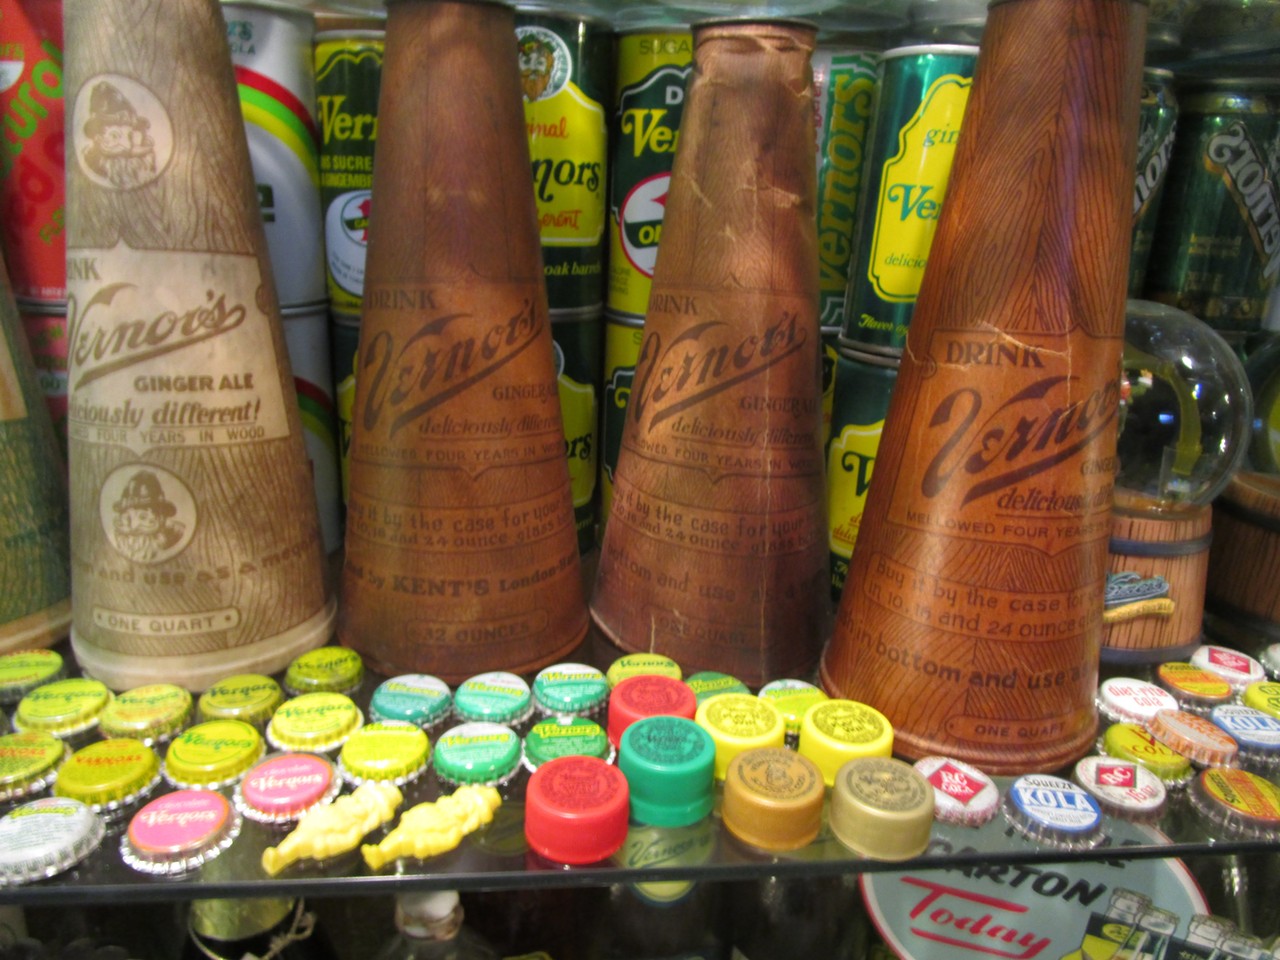 Here are cans, bottlecaps, and promotional bottle-holders that doubled as megaphones.